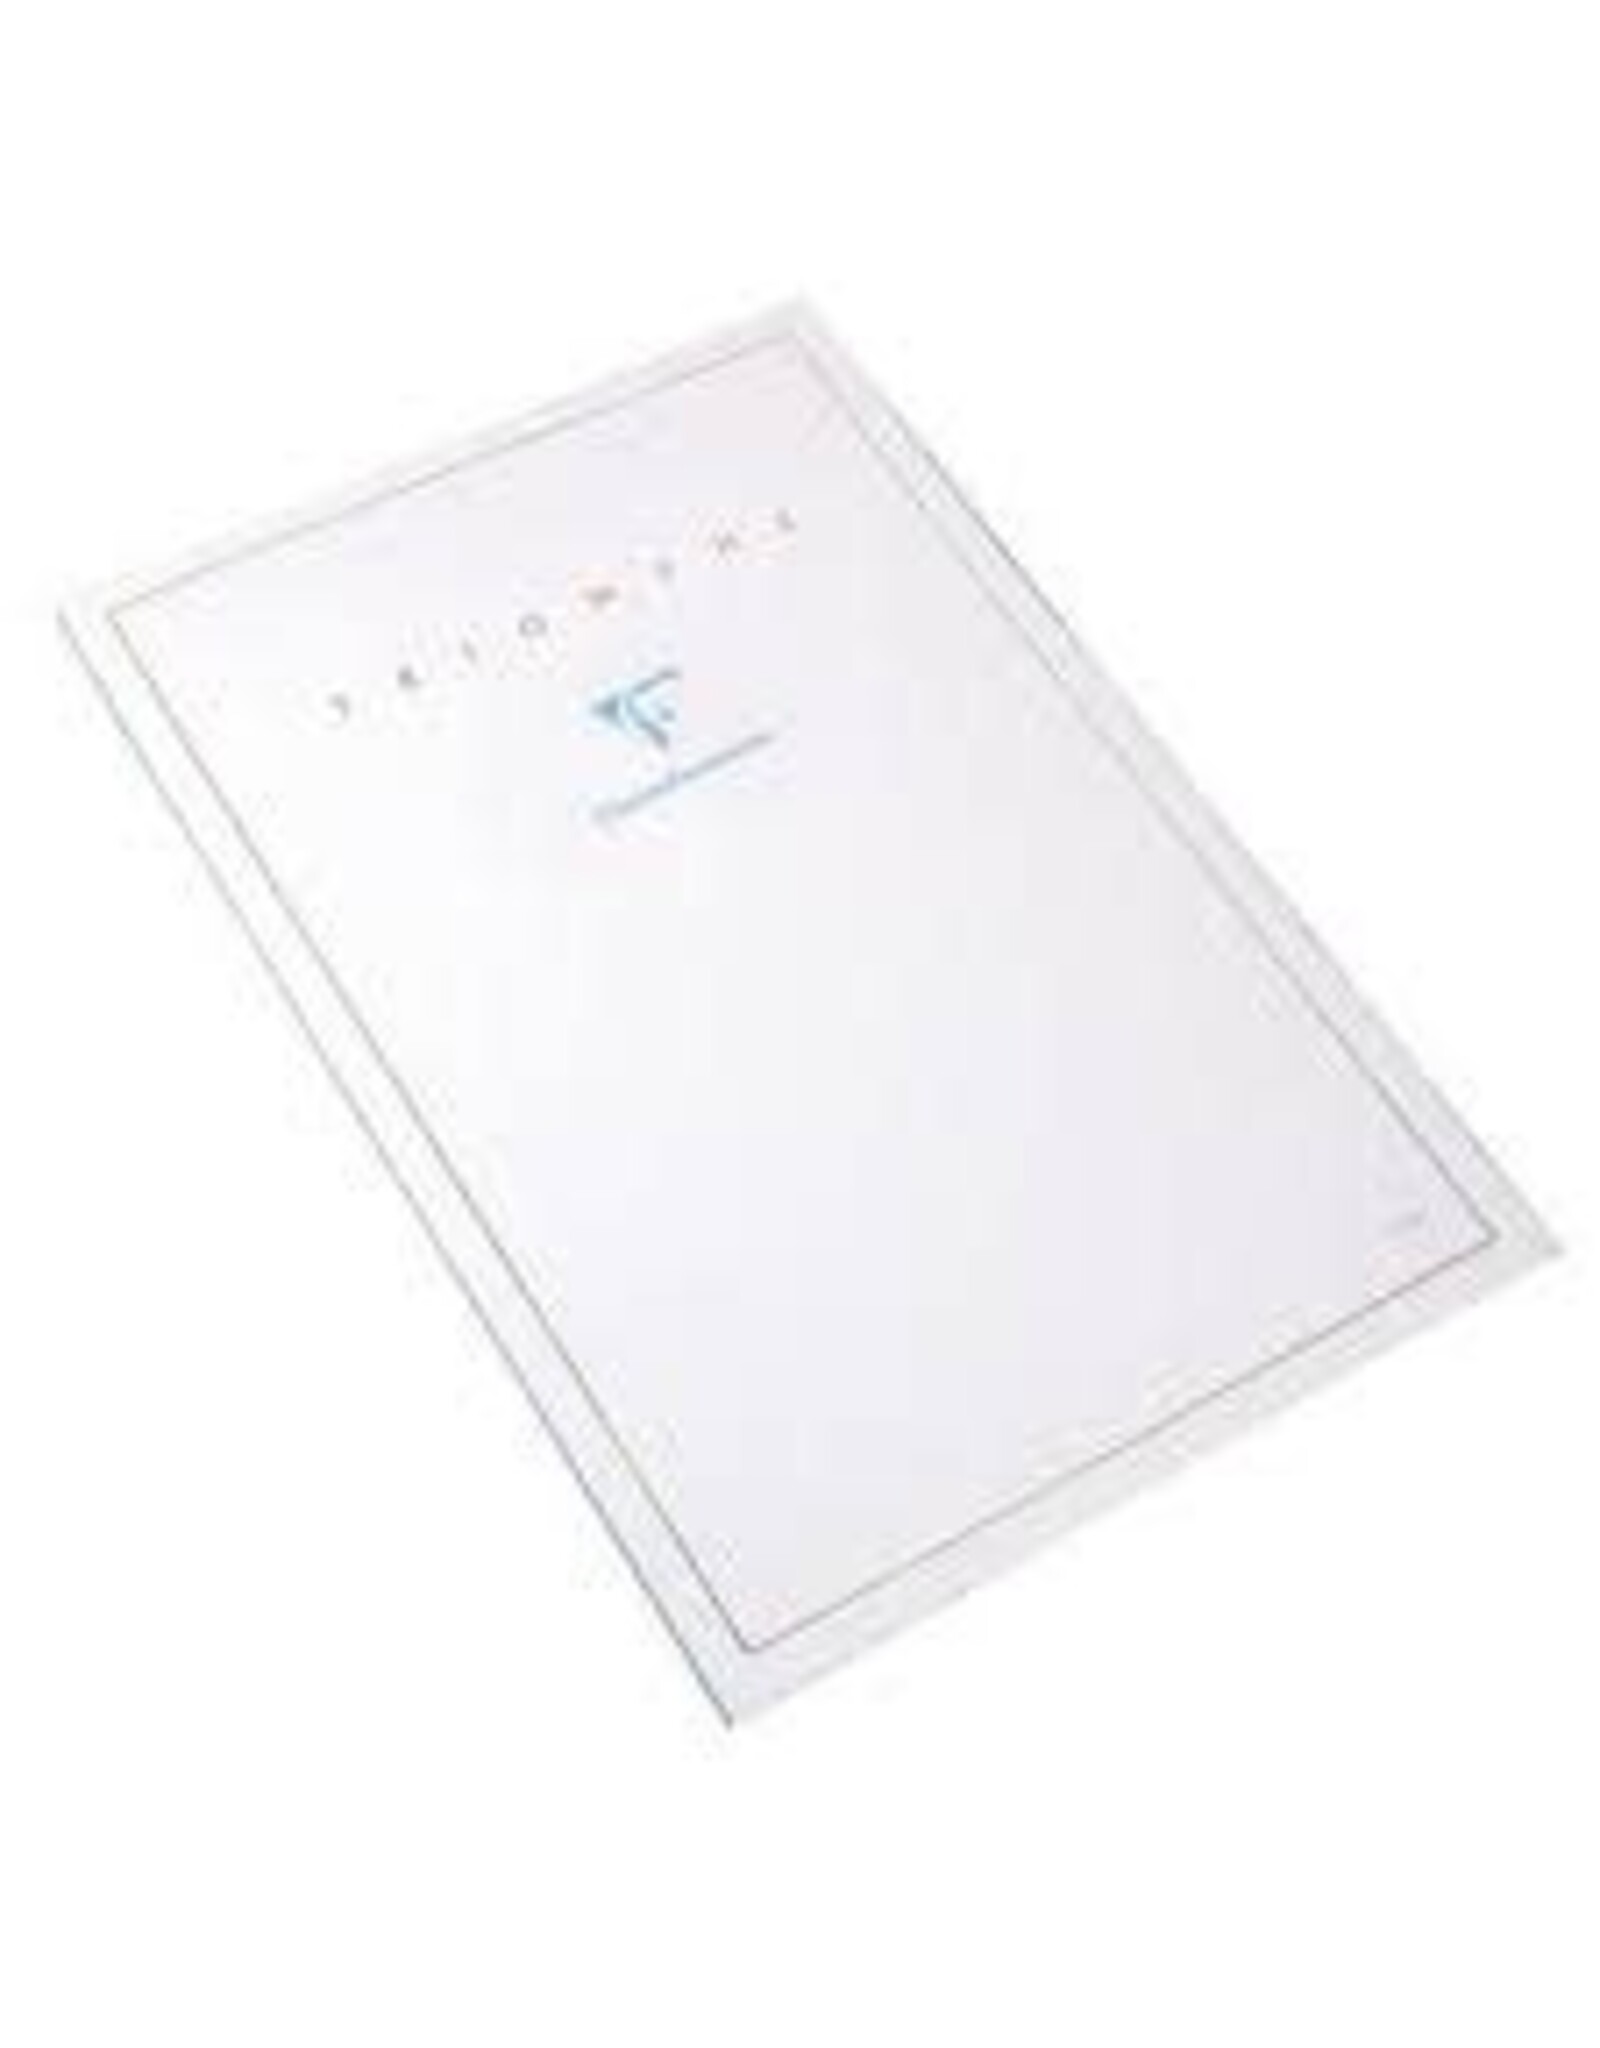 CLEARANCE Clairefontaine Tablets ''Triomphe'' Stationery, Blank 50 sheets, 8 1/4 x 11 3/4, Extra White